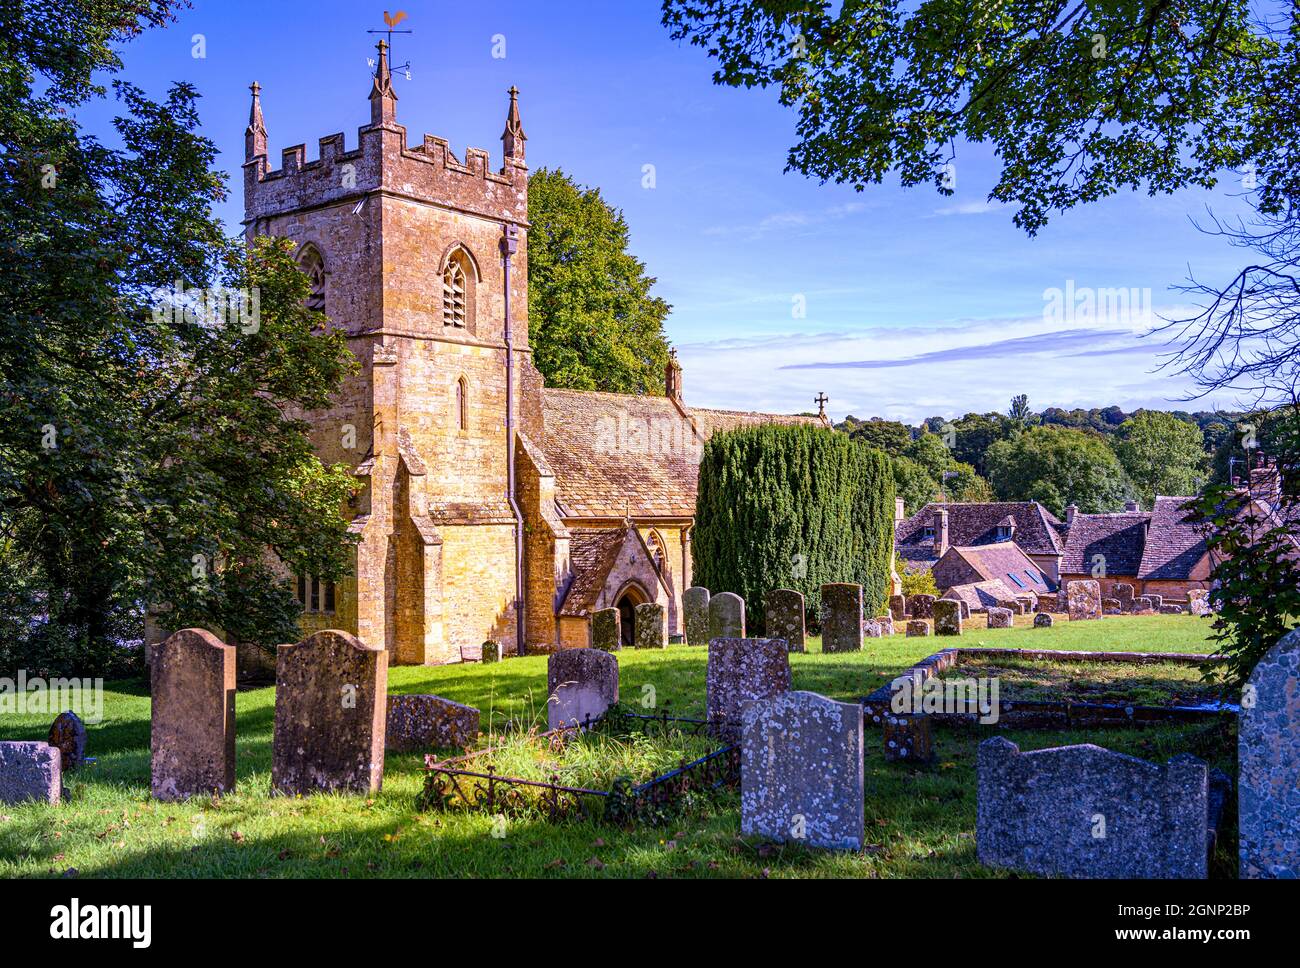 St Perer Peters 12th century church, churchyard & cemetry graveyard in the pretty cotswold cotswolds village of Upper Slaughter Gloucestershire Englan Stock Photo